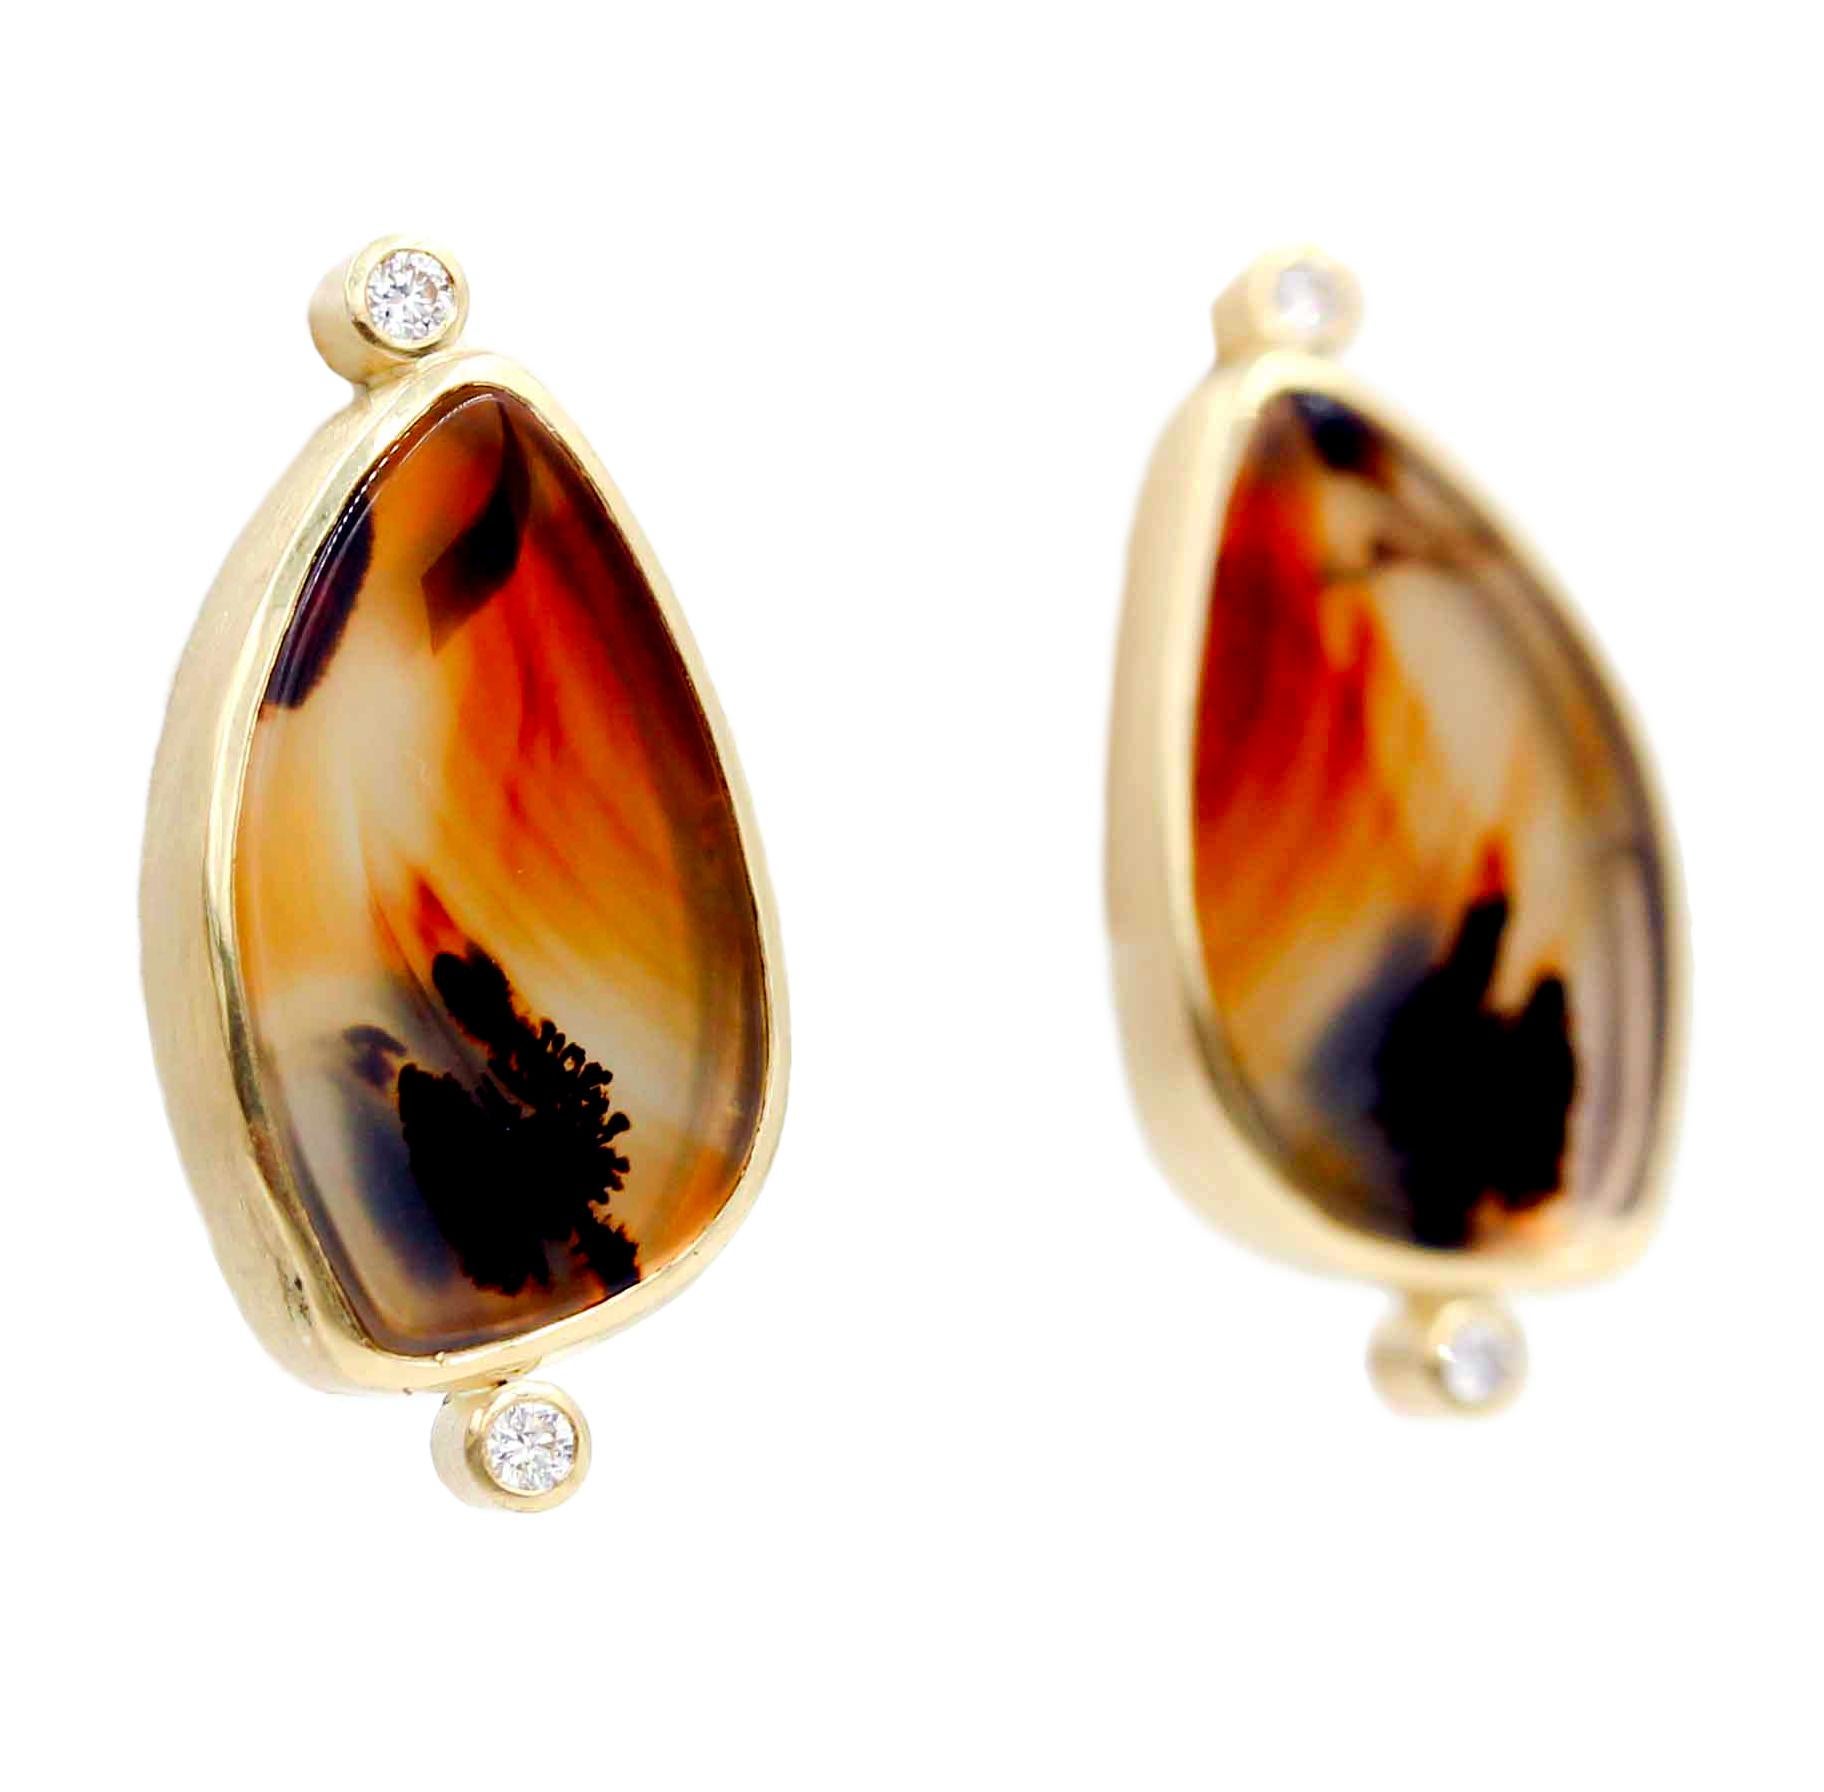 Robin Waynee
18k Gold Agate and Diamond Stud Earrings

The diamond and agate earrings feature bezel set agates and diamonds. 

Robin Waynee has an innovative approach to jewelry—handcrafting precious stones and metals into reversible, rolling pieces